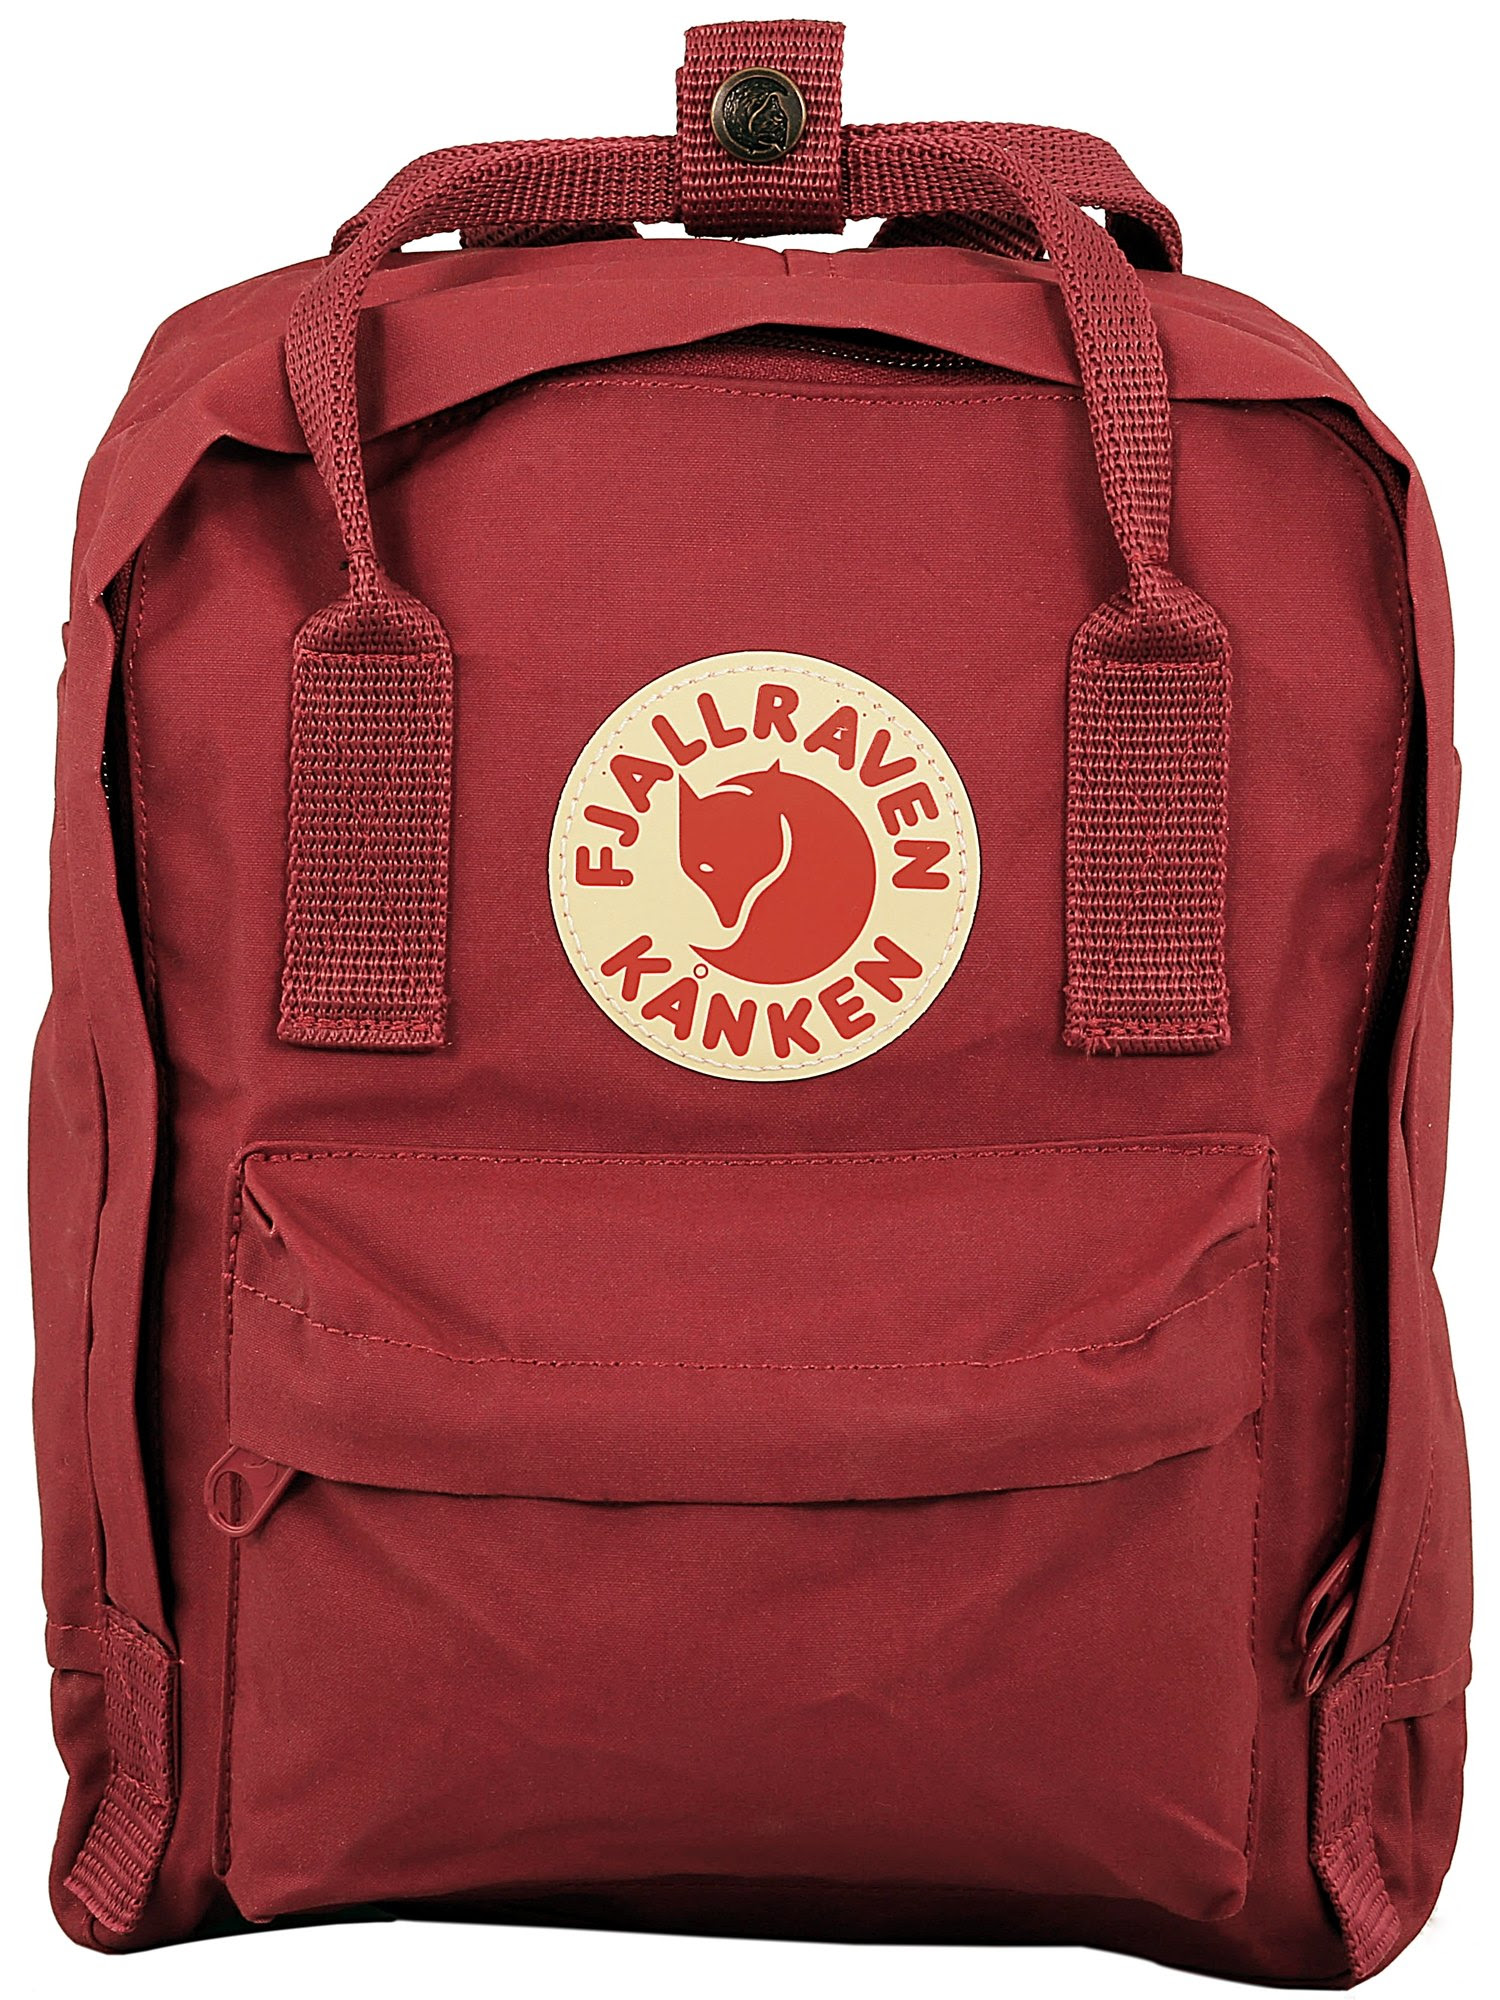 Fjallraven Kanken Backpack for $45.59 after promo code BAGS20 with free shipping